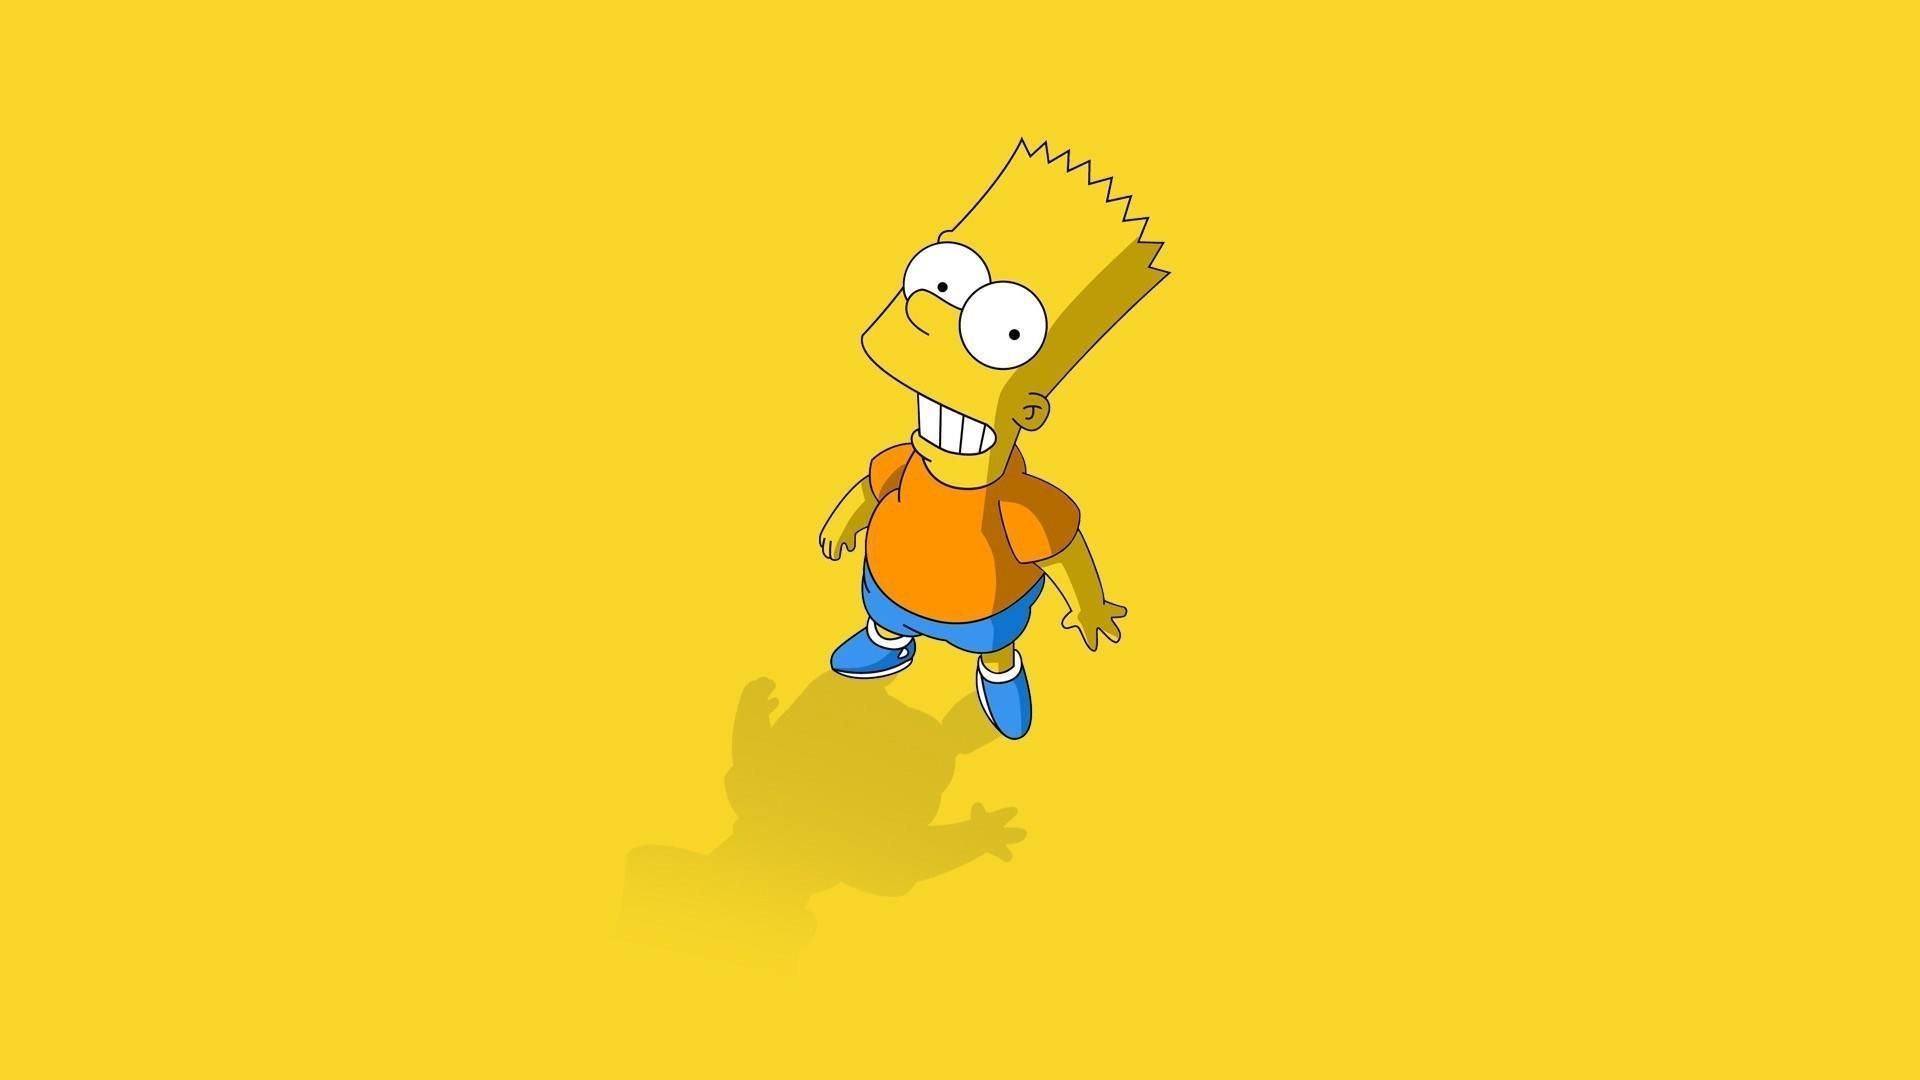 Get awesome The Simpsons HD image in each new Chrome tab!. Cartoon wallpaper, Character wallpaper, Bape wallpaper